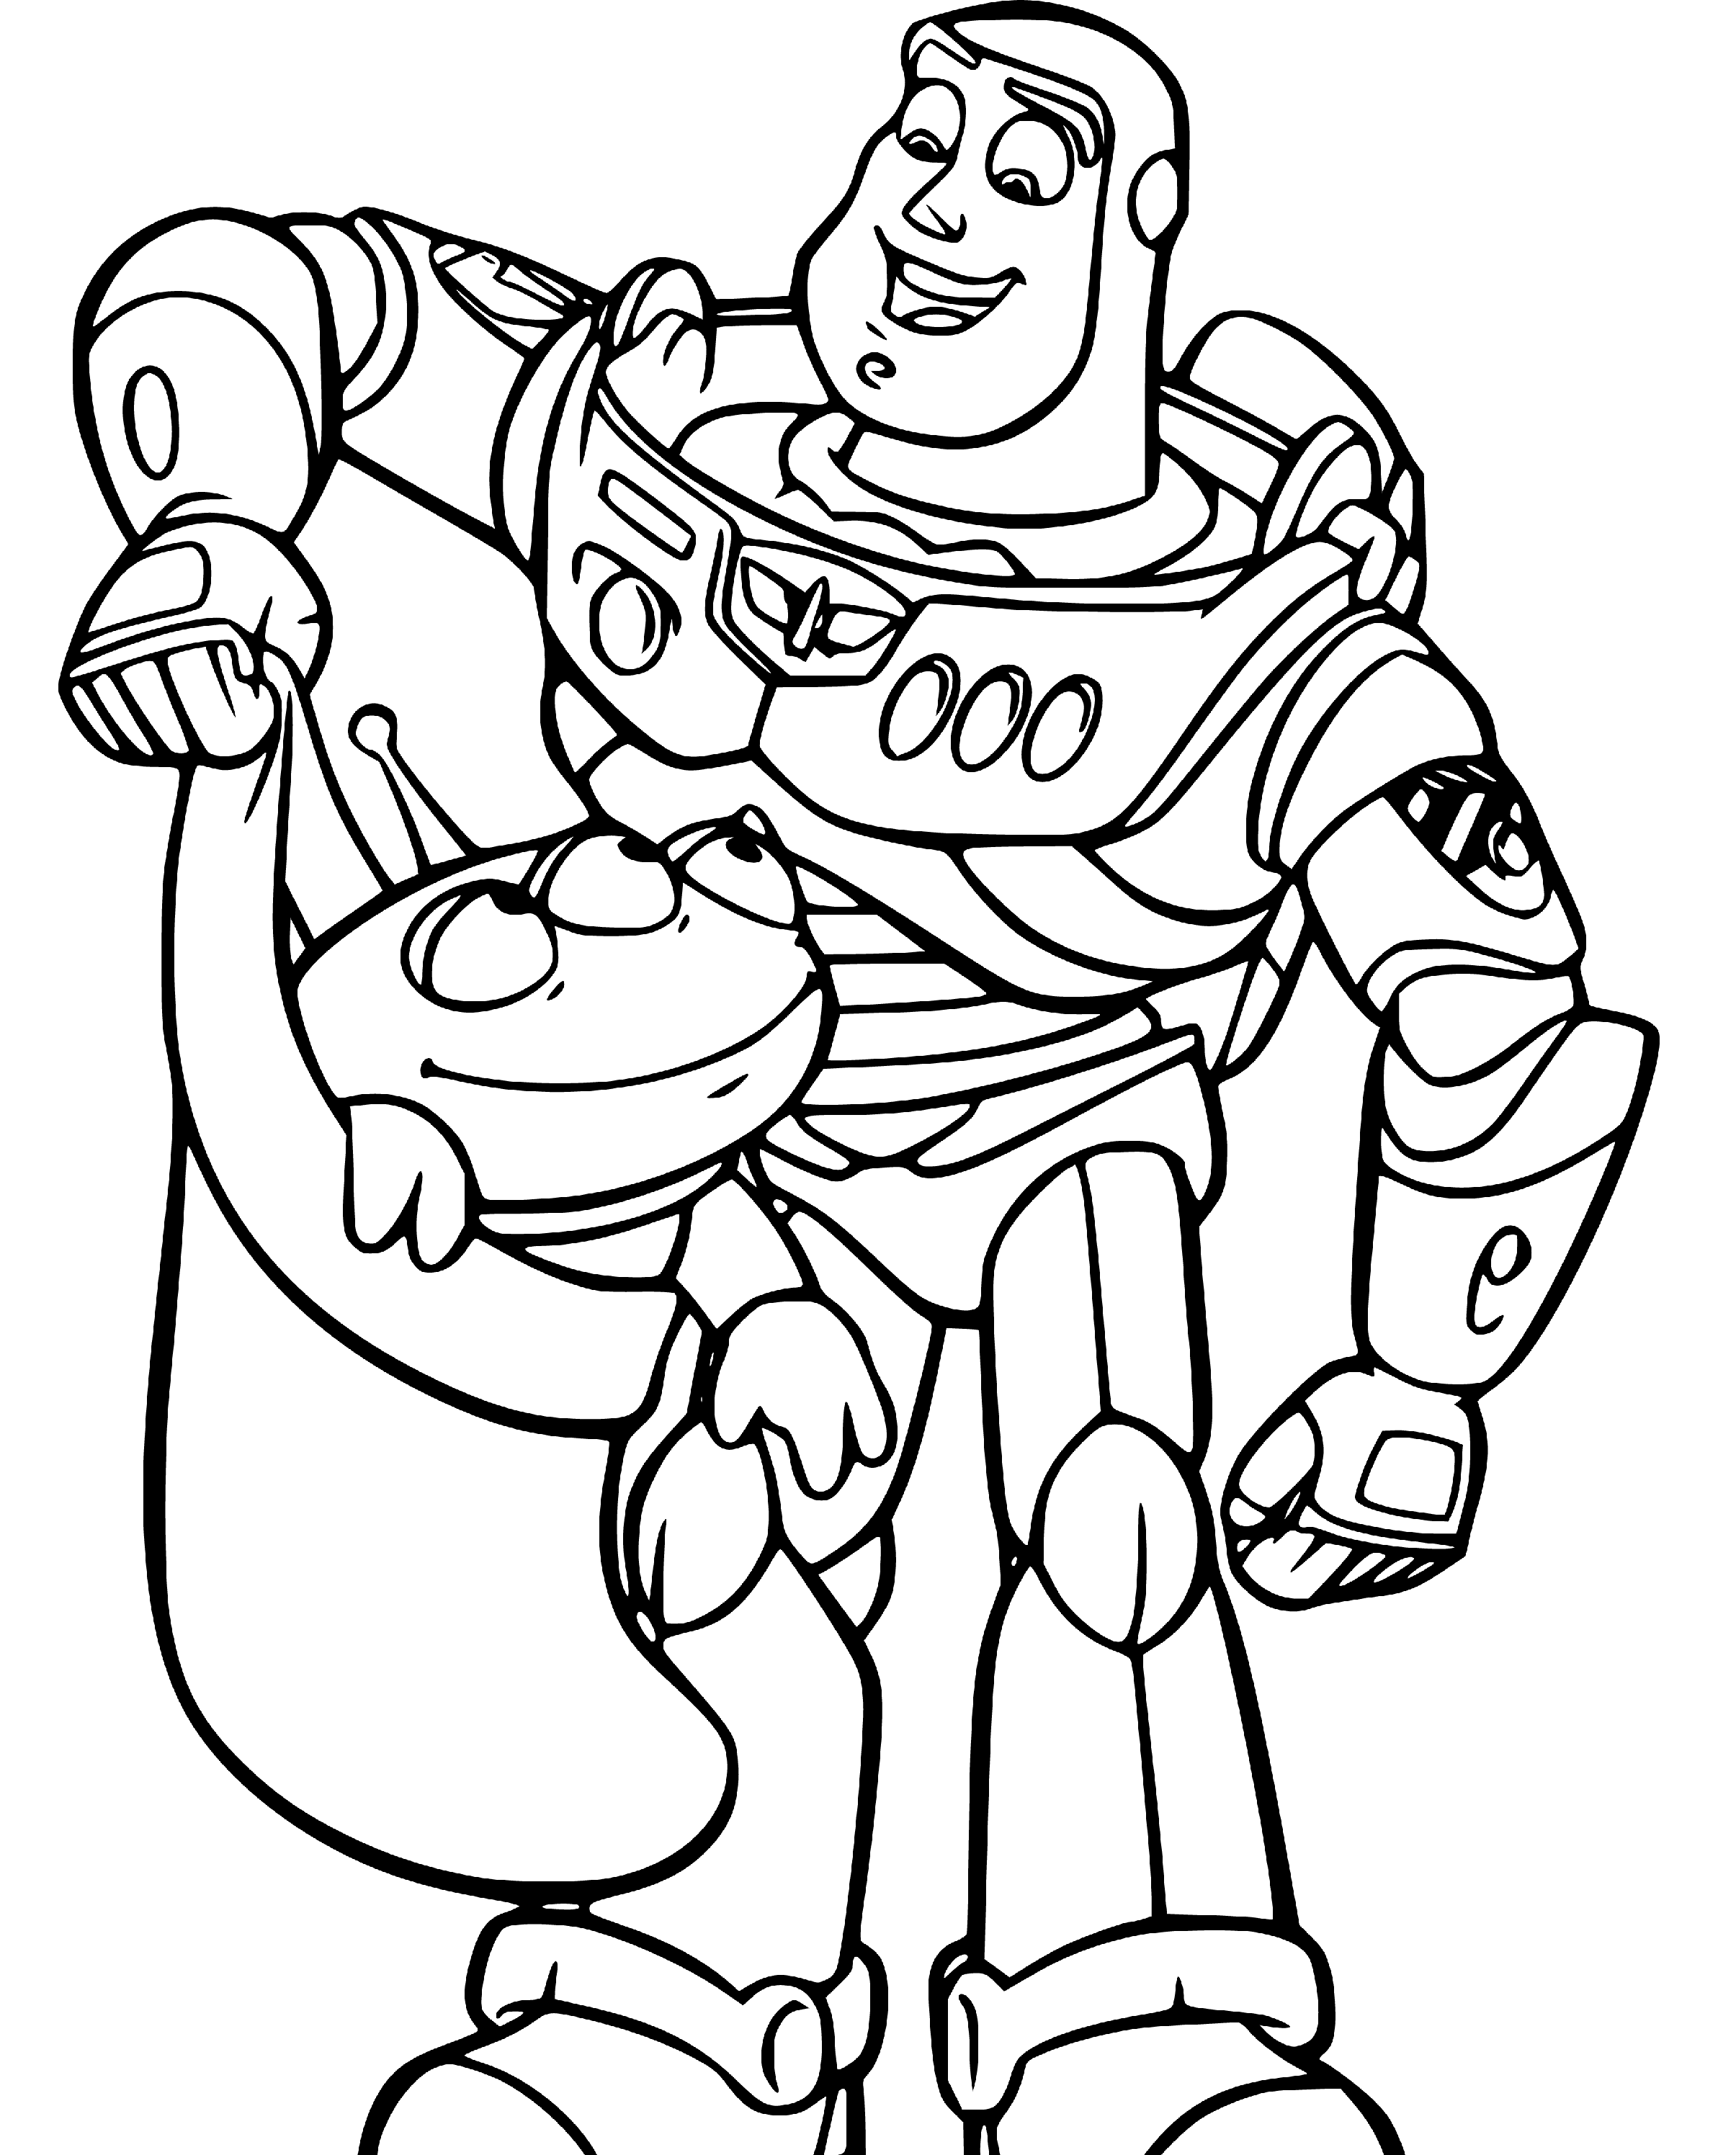 Alien and Buzz Coloring Page (Toy Story) - SheetalColor.com